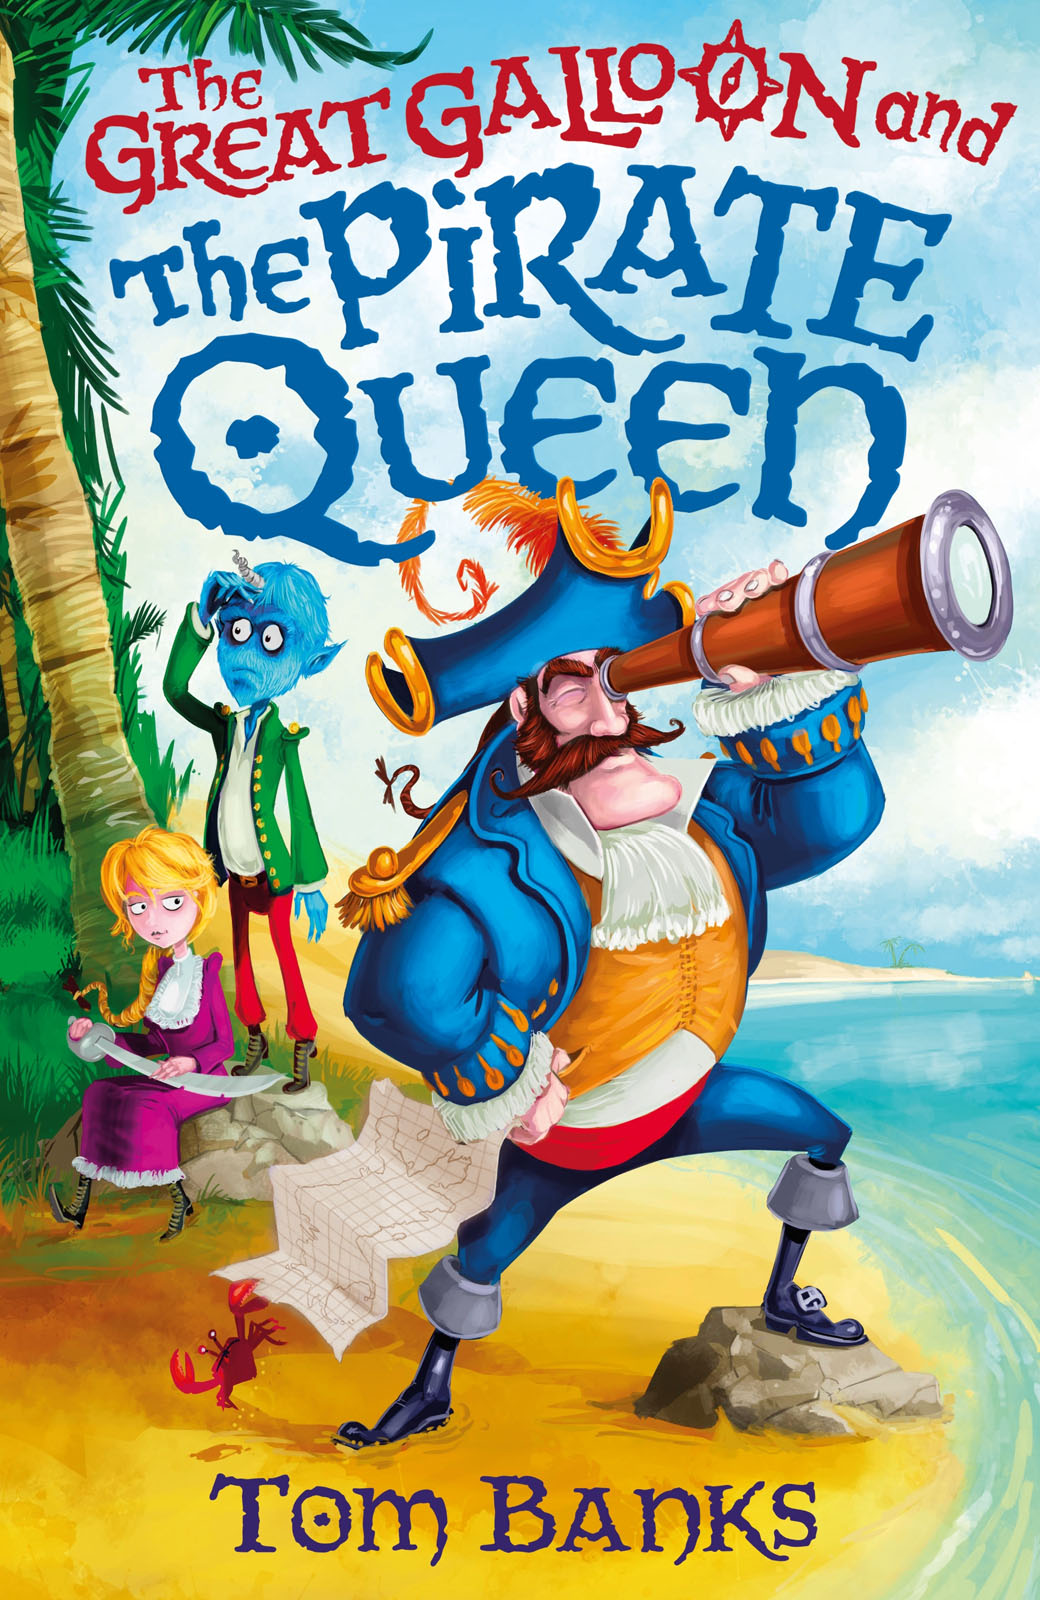 The Great Galloon and the Pirate Queen (2015)